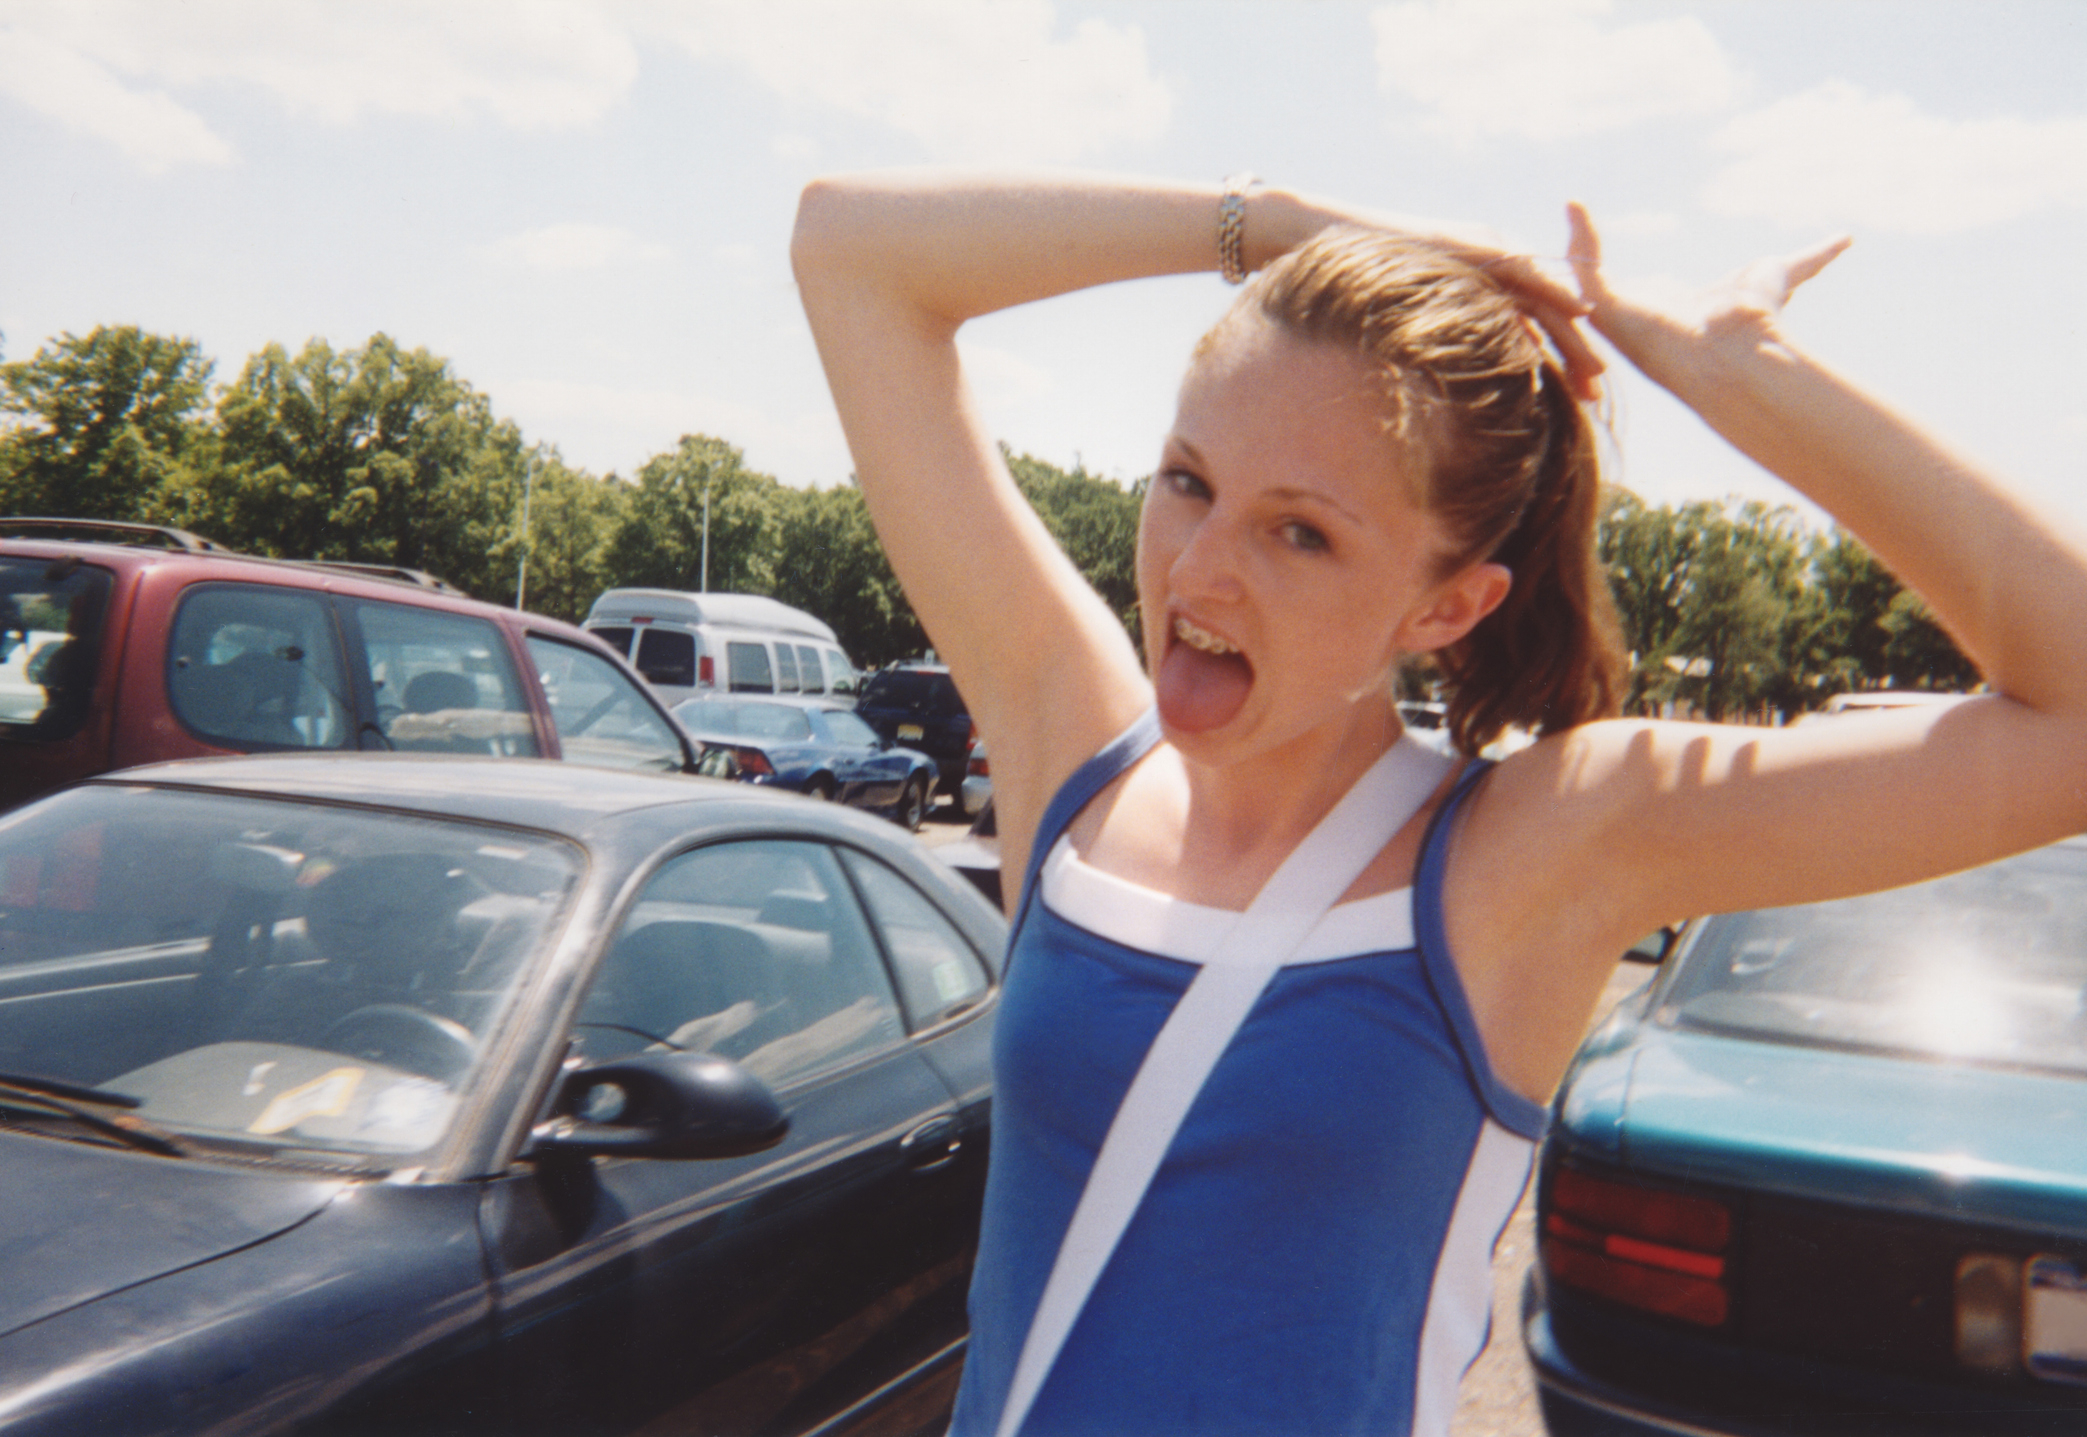 
A joyful person poses with hands on their head in a parking lot, expressing a carefree moment